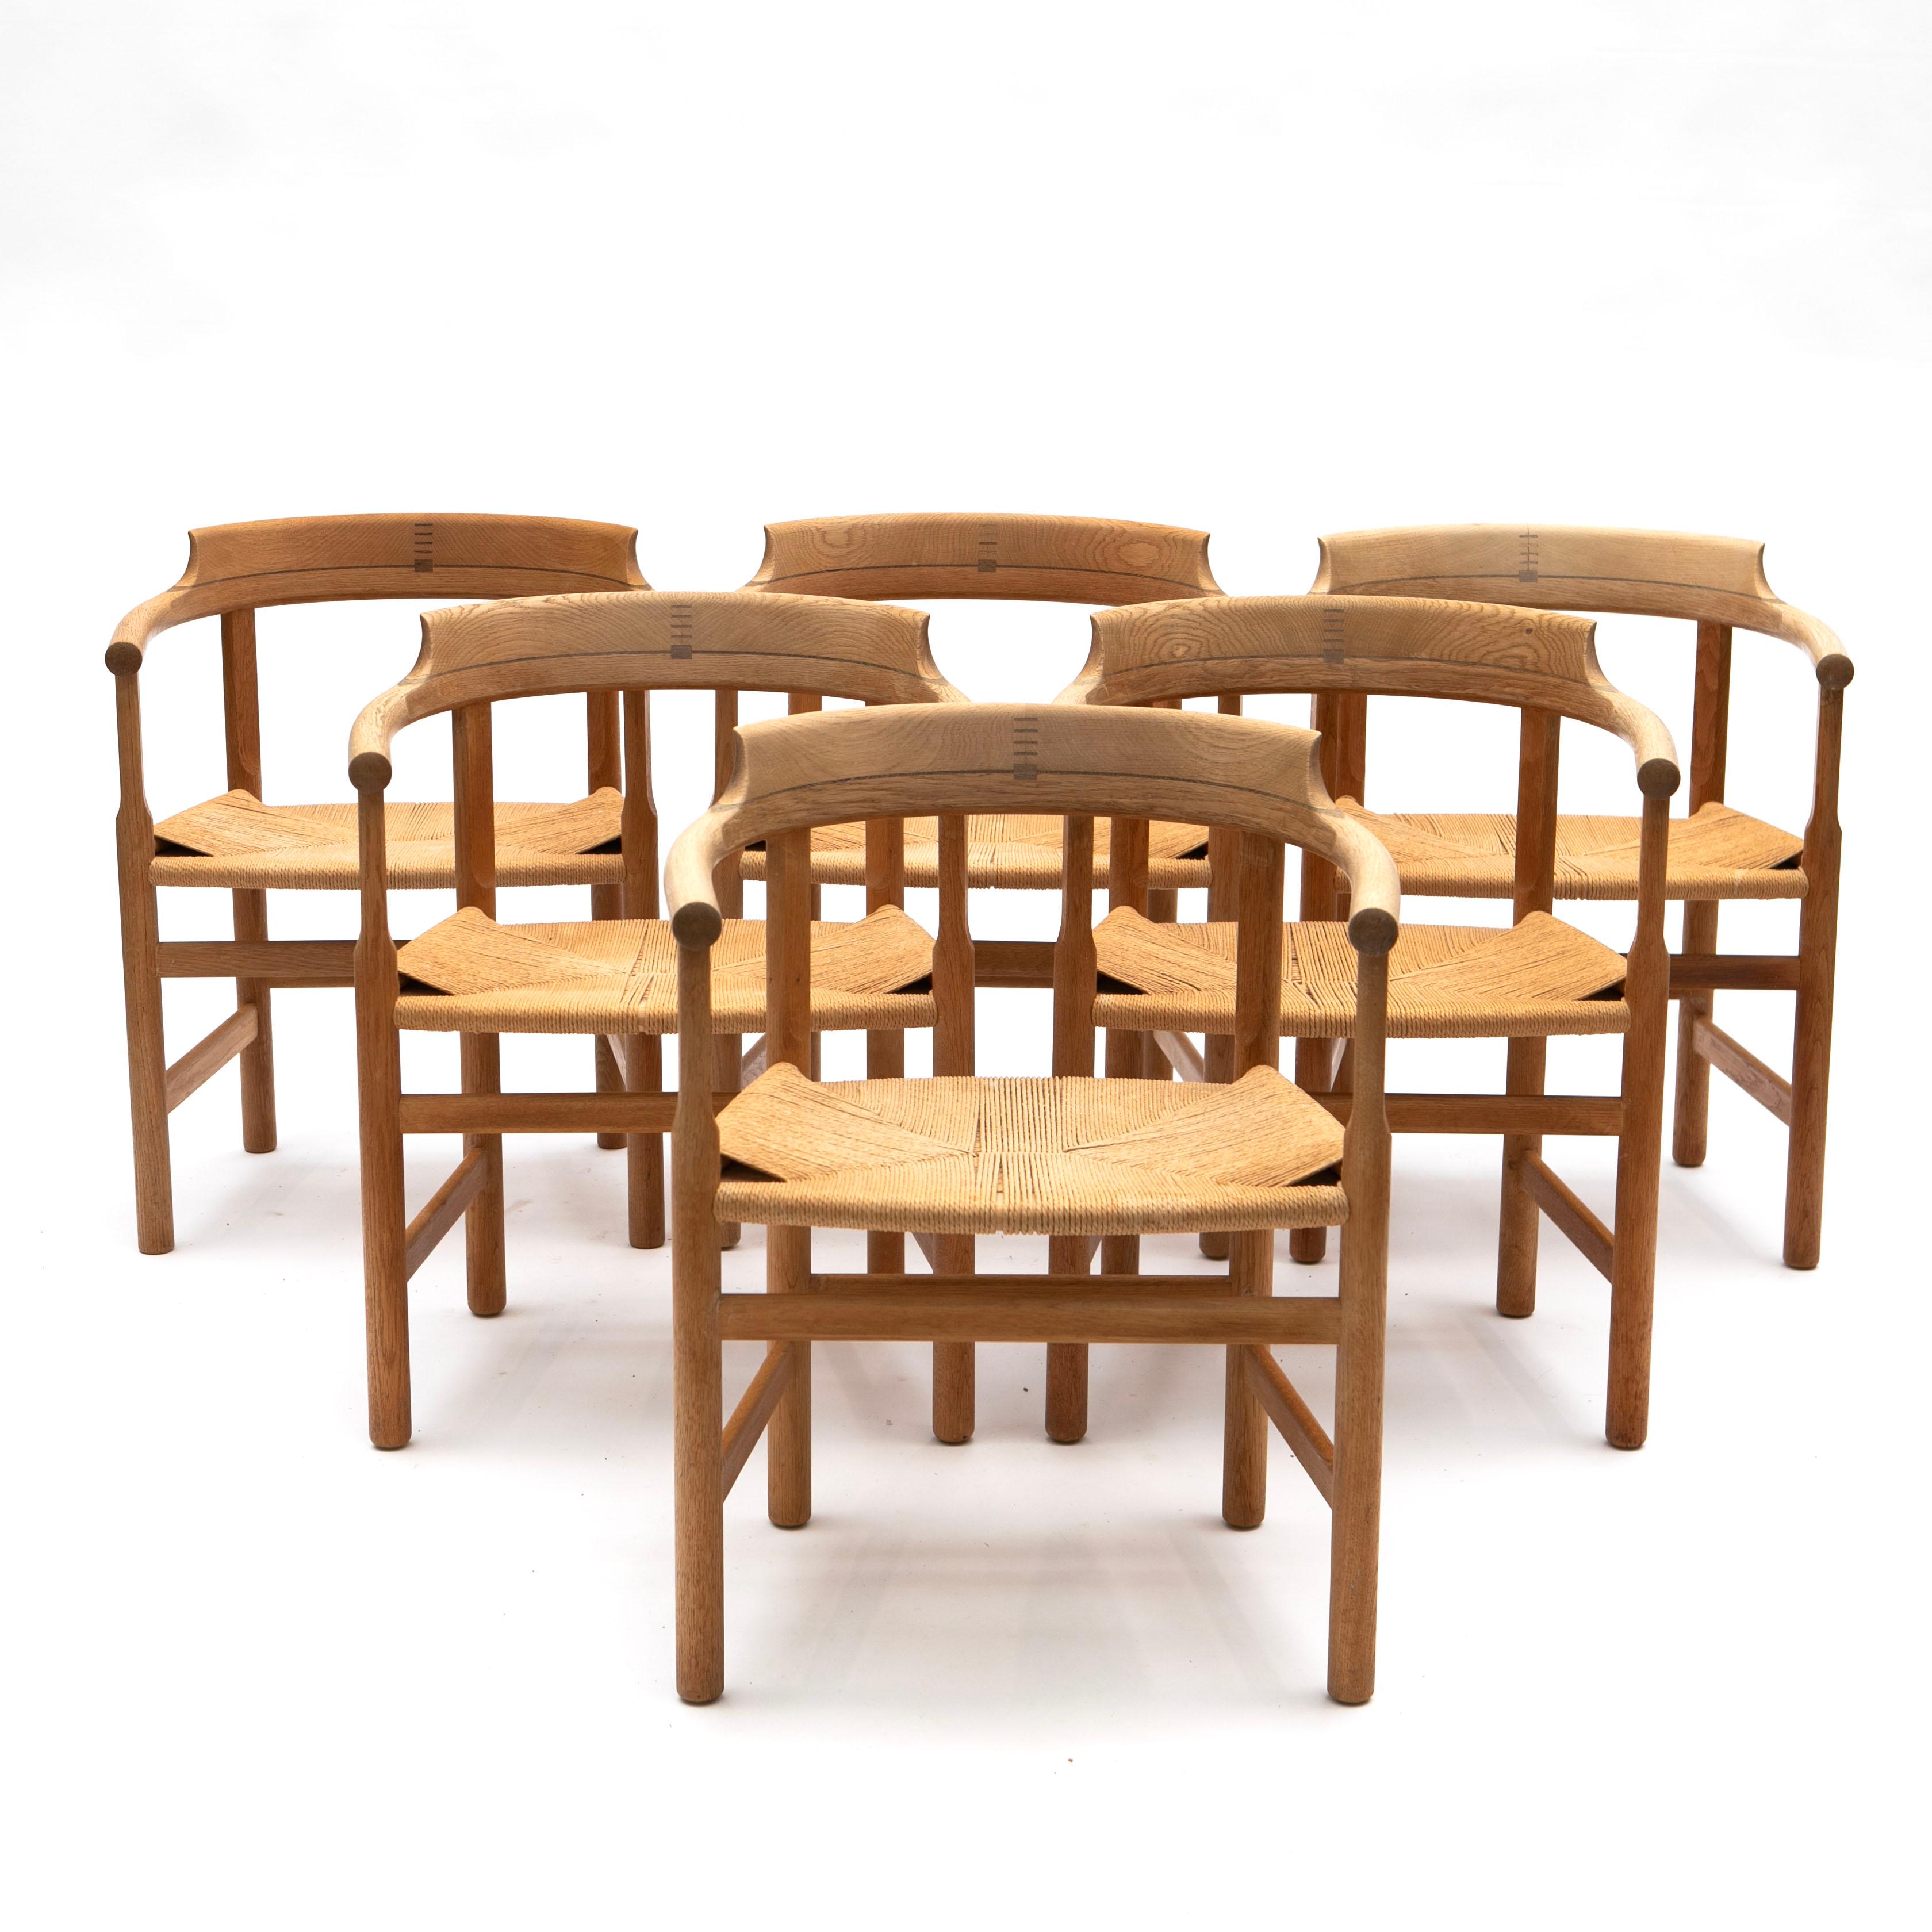 6 armchairs, model PP 62 by Hans J. Wegner.
Crafted in solid oak with inlaid wengé wood on the back, seats made of paper cord.
Manufactured by PP Møbler in 1969.
Beautiful original condition with natural patina.
Only sold as a set of 6 chairs